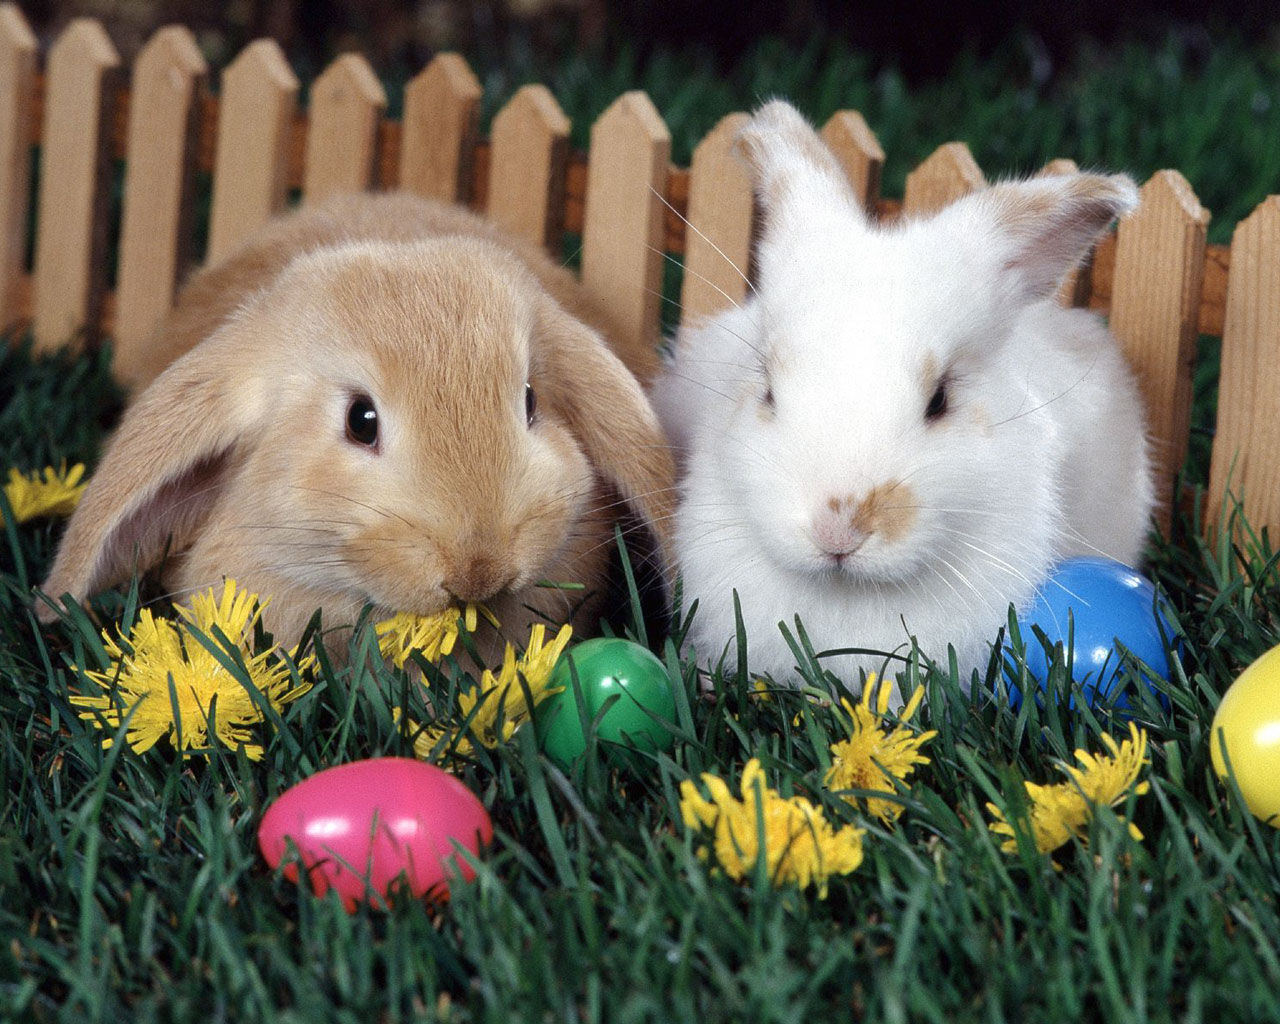 Hd wallpaper with two bunnies rabbits jpg | Chainimage